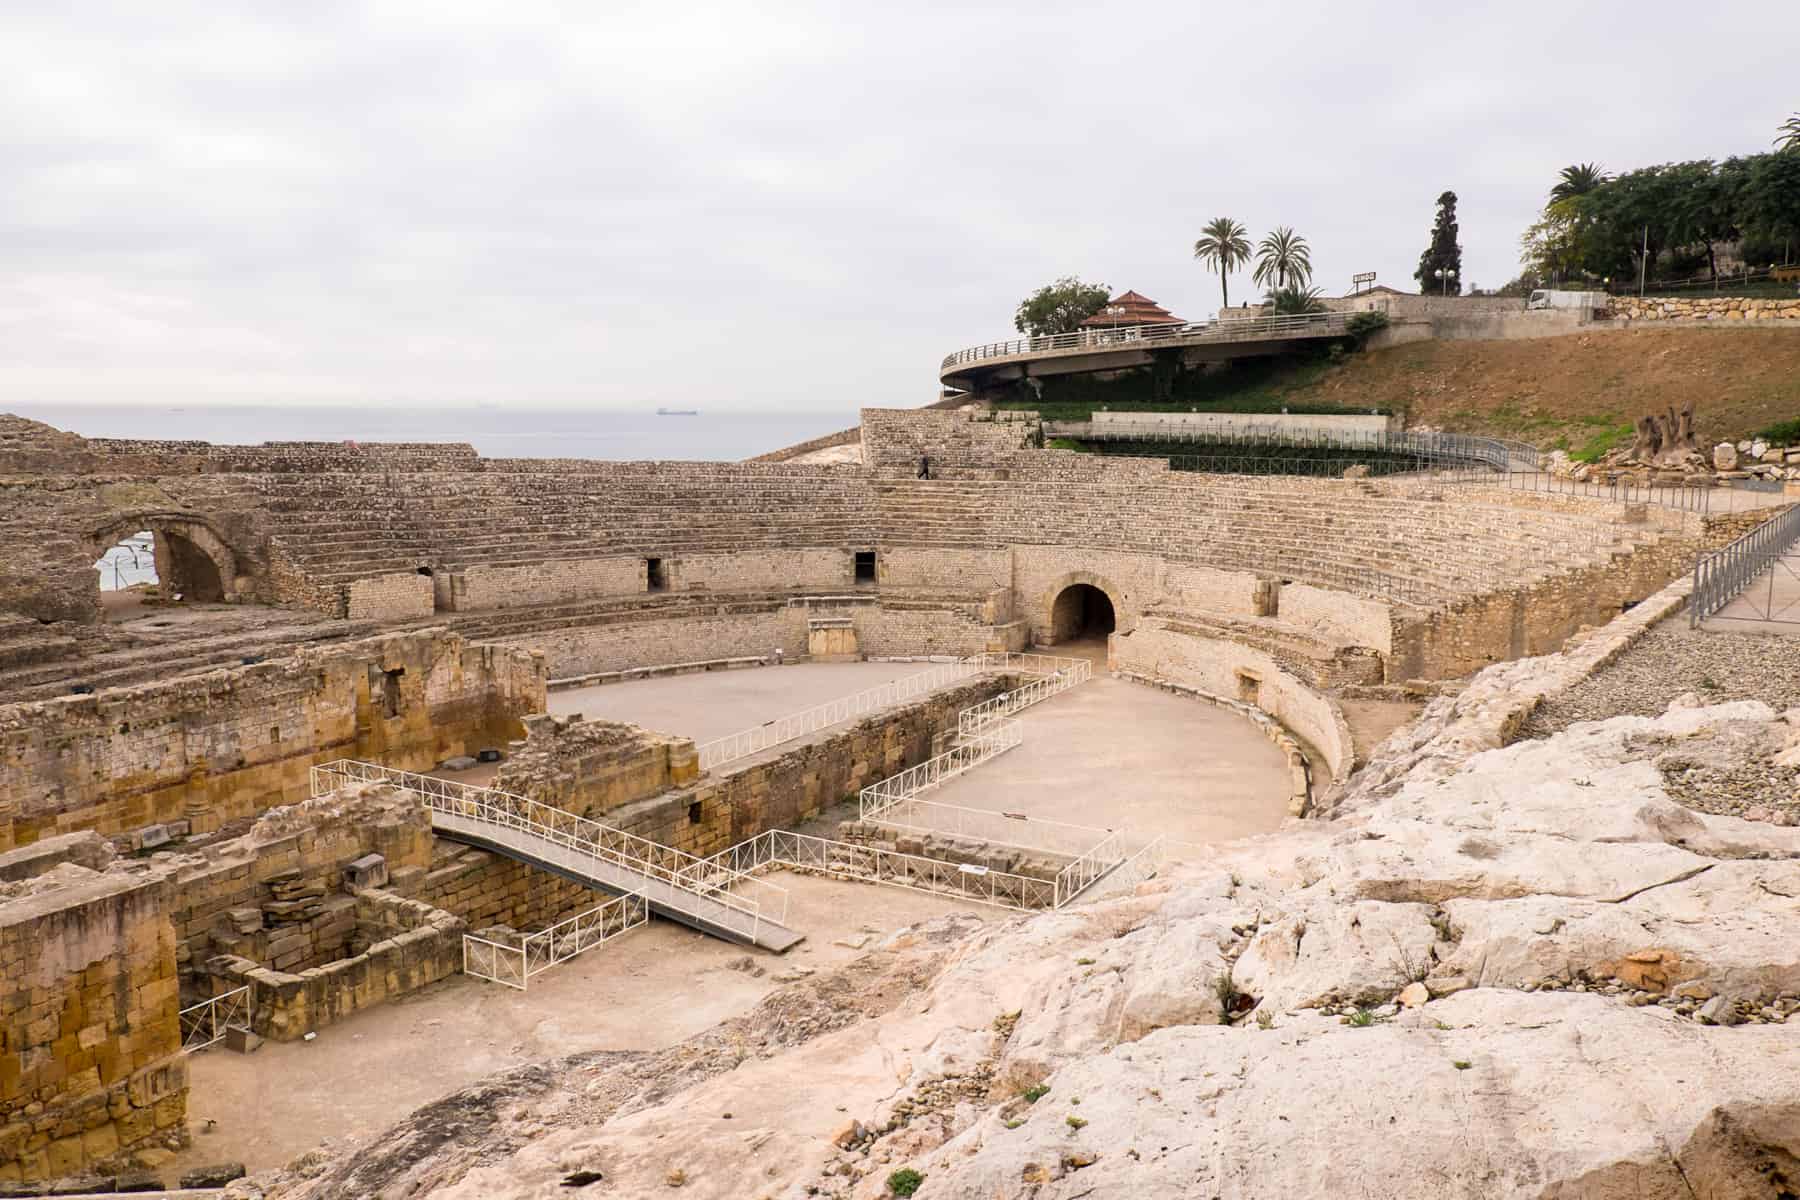 The yellowing ruins of the Roman Tarragona Amphitheatre with a view to Mediterranean Sea, Spain